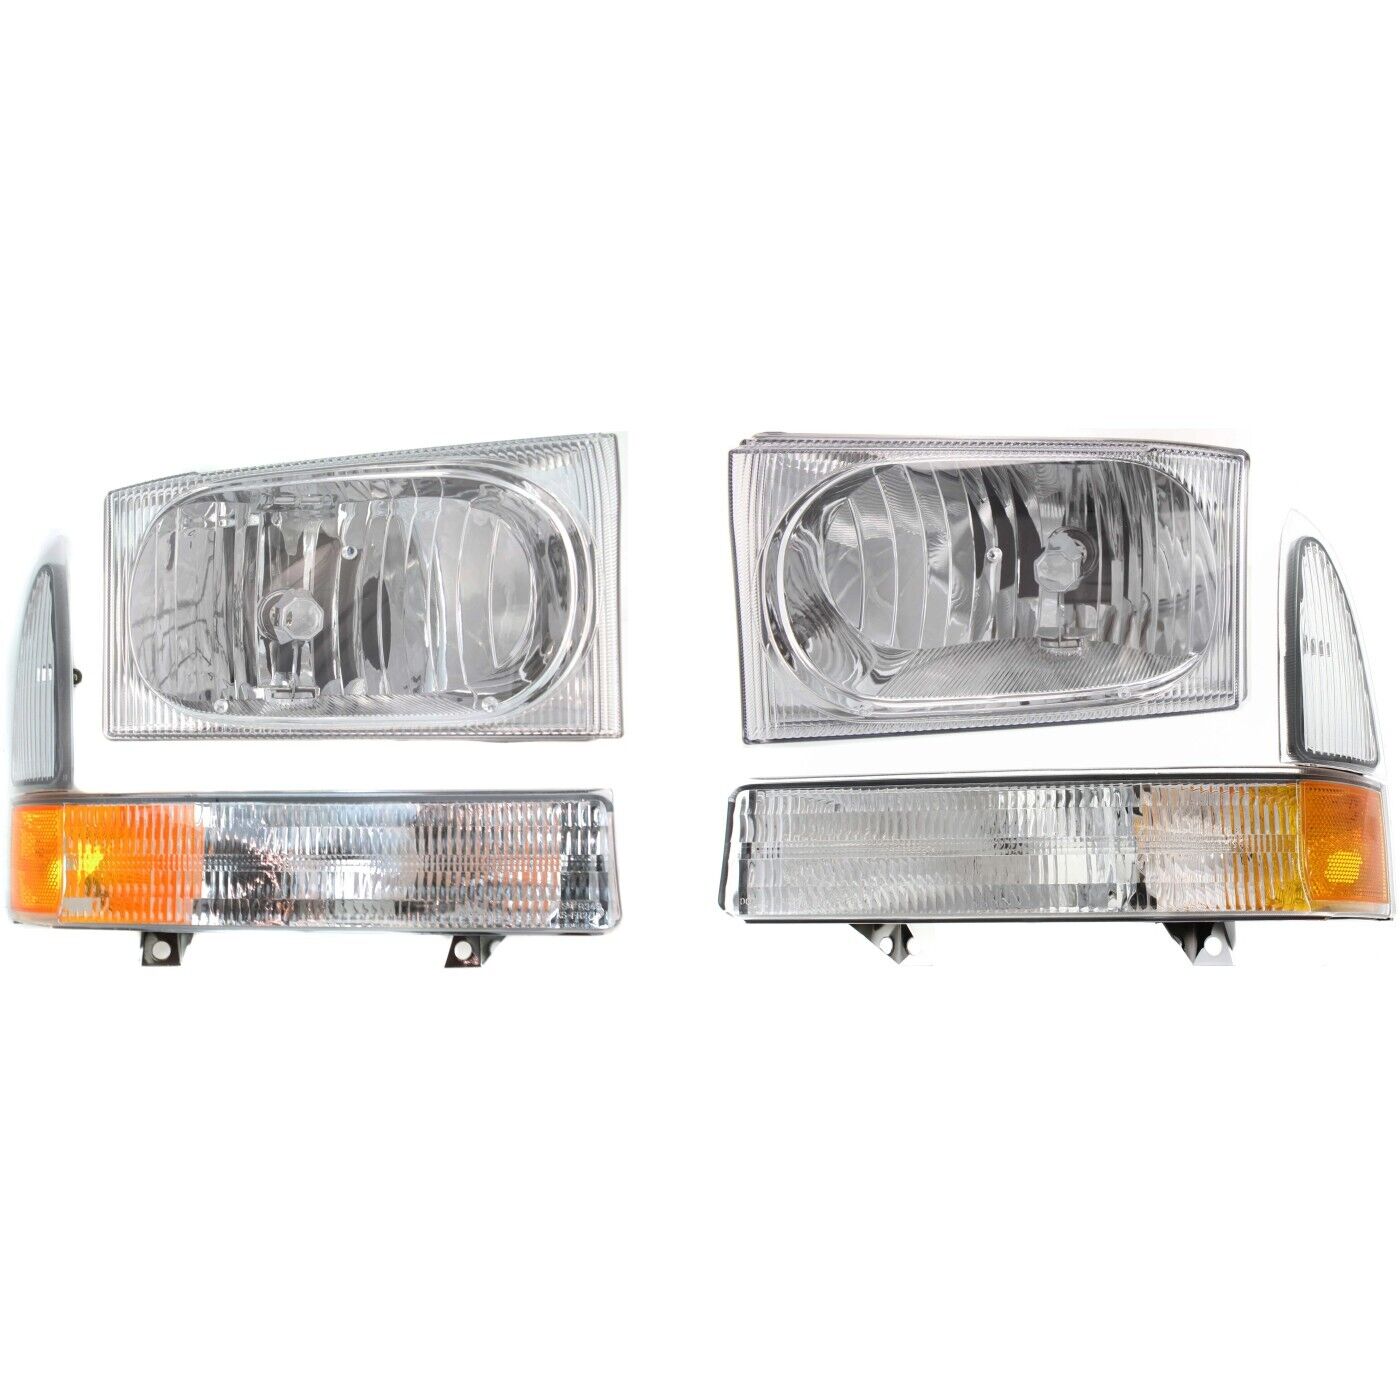 Headlight Kit For 99-04 Ford F-250 Super Duty Left and Right With Corner Lights